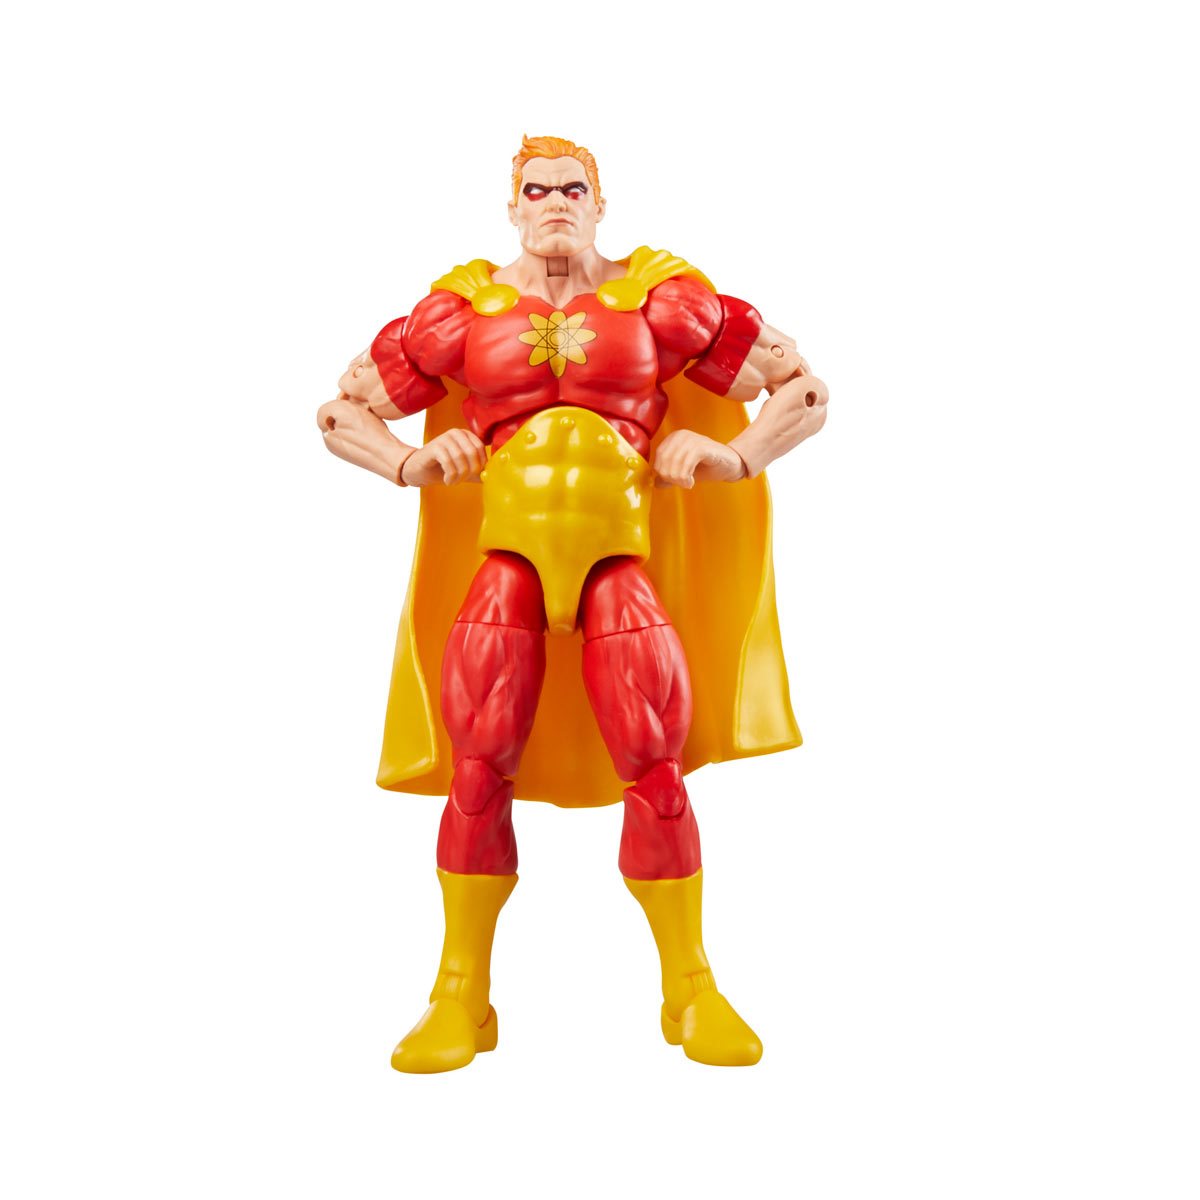 Marvel Legends Hyperion and Doctor Spectrum Squadron Supreme 6-Inch - Heretoserveyou